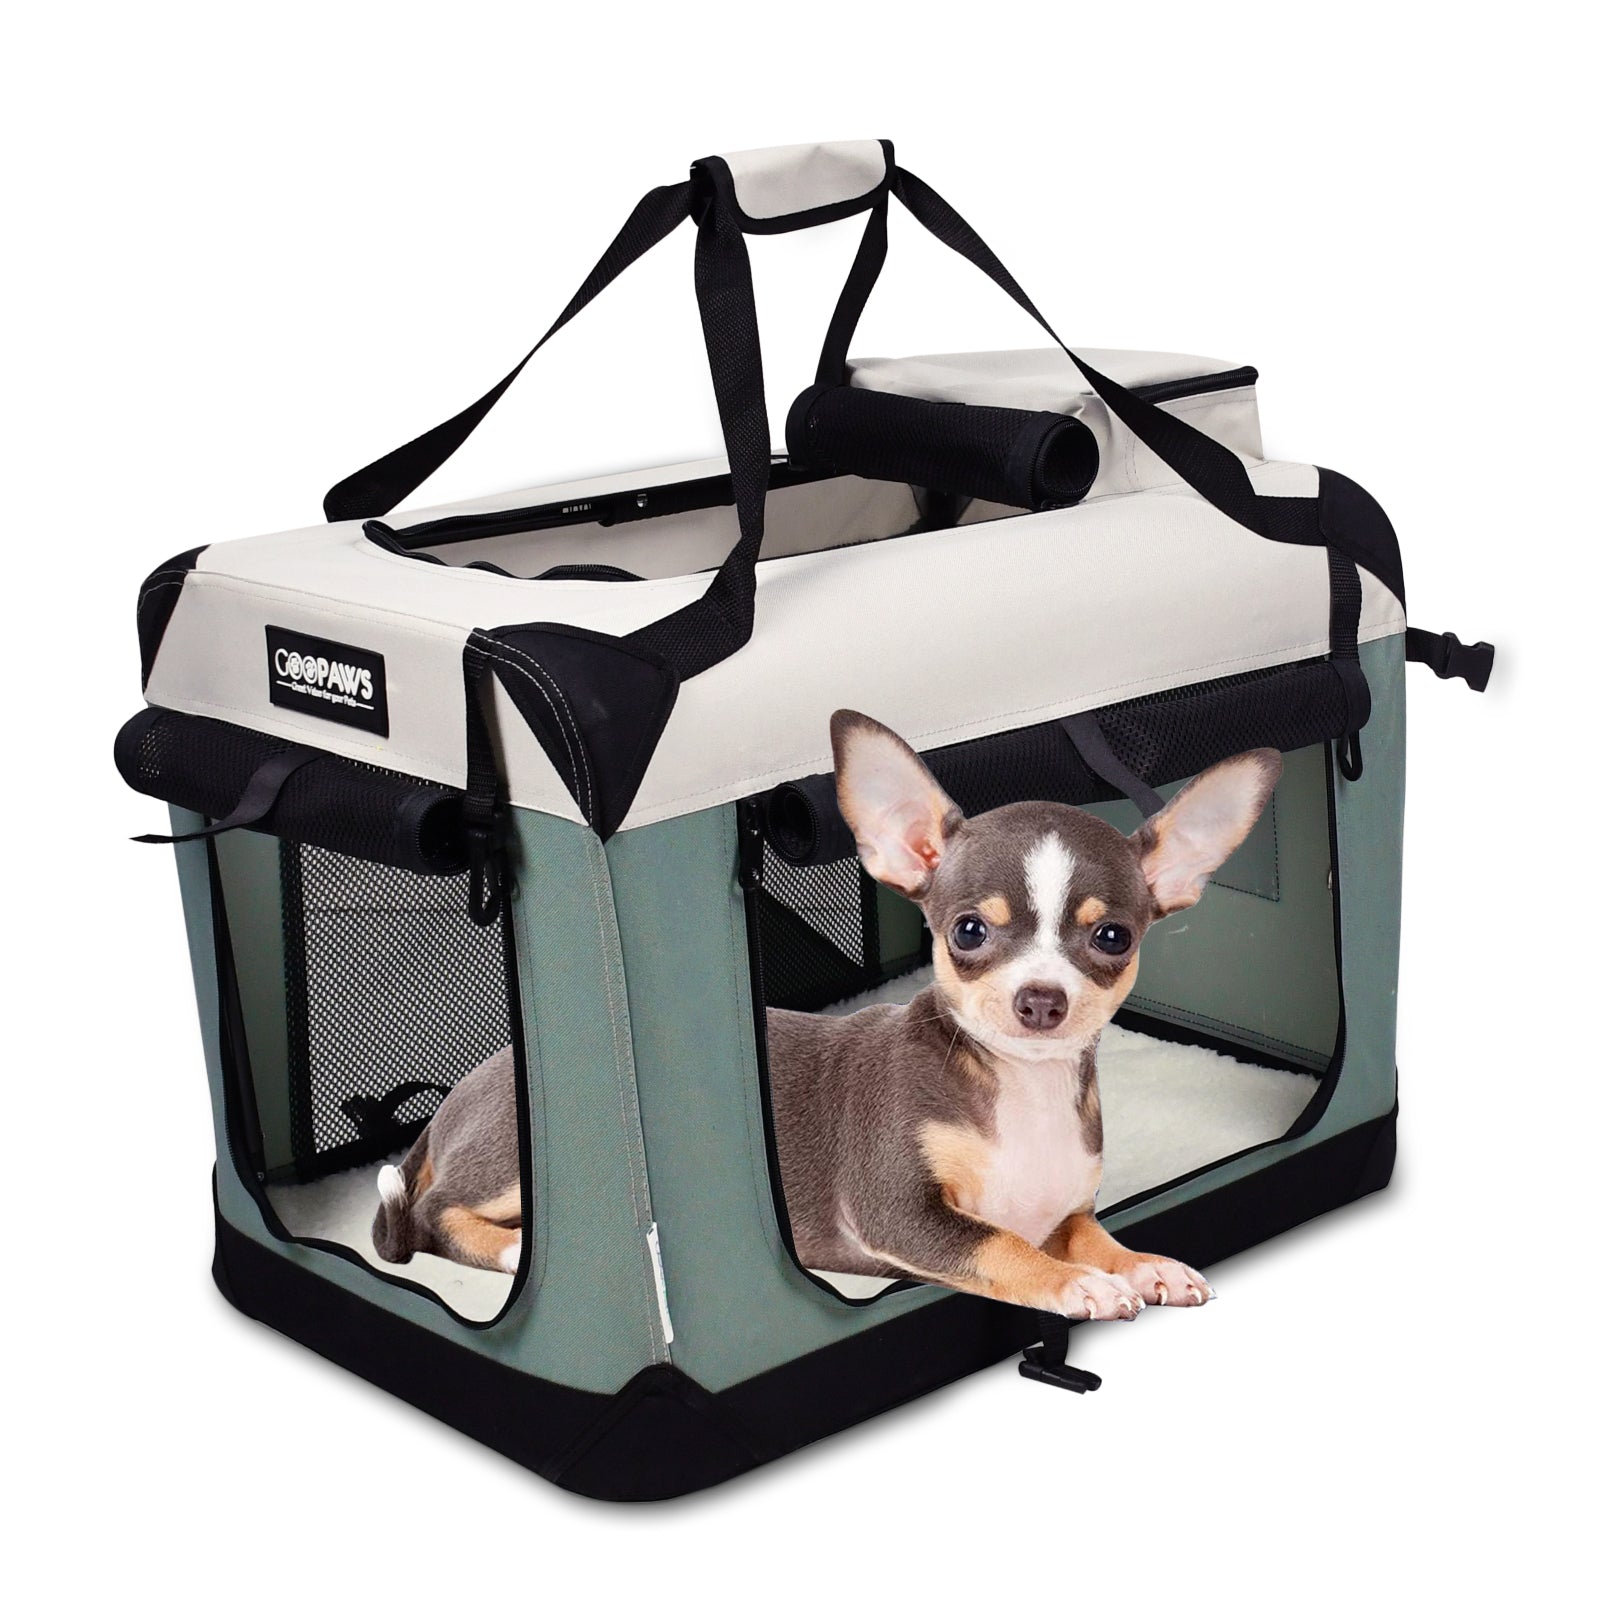 Jespet & GOOPAWS Indoor & Outdoor 3-Door Collapsible Soft-Sided Dog, Cat & Small Pet Crate, Shale Green, 24''